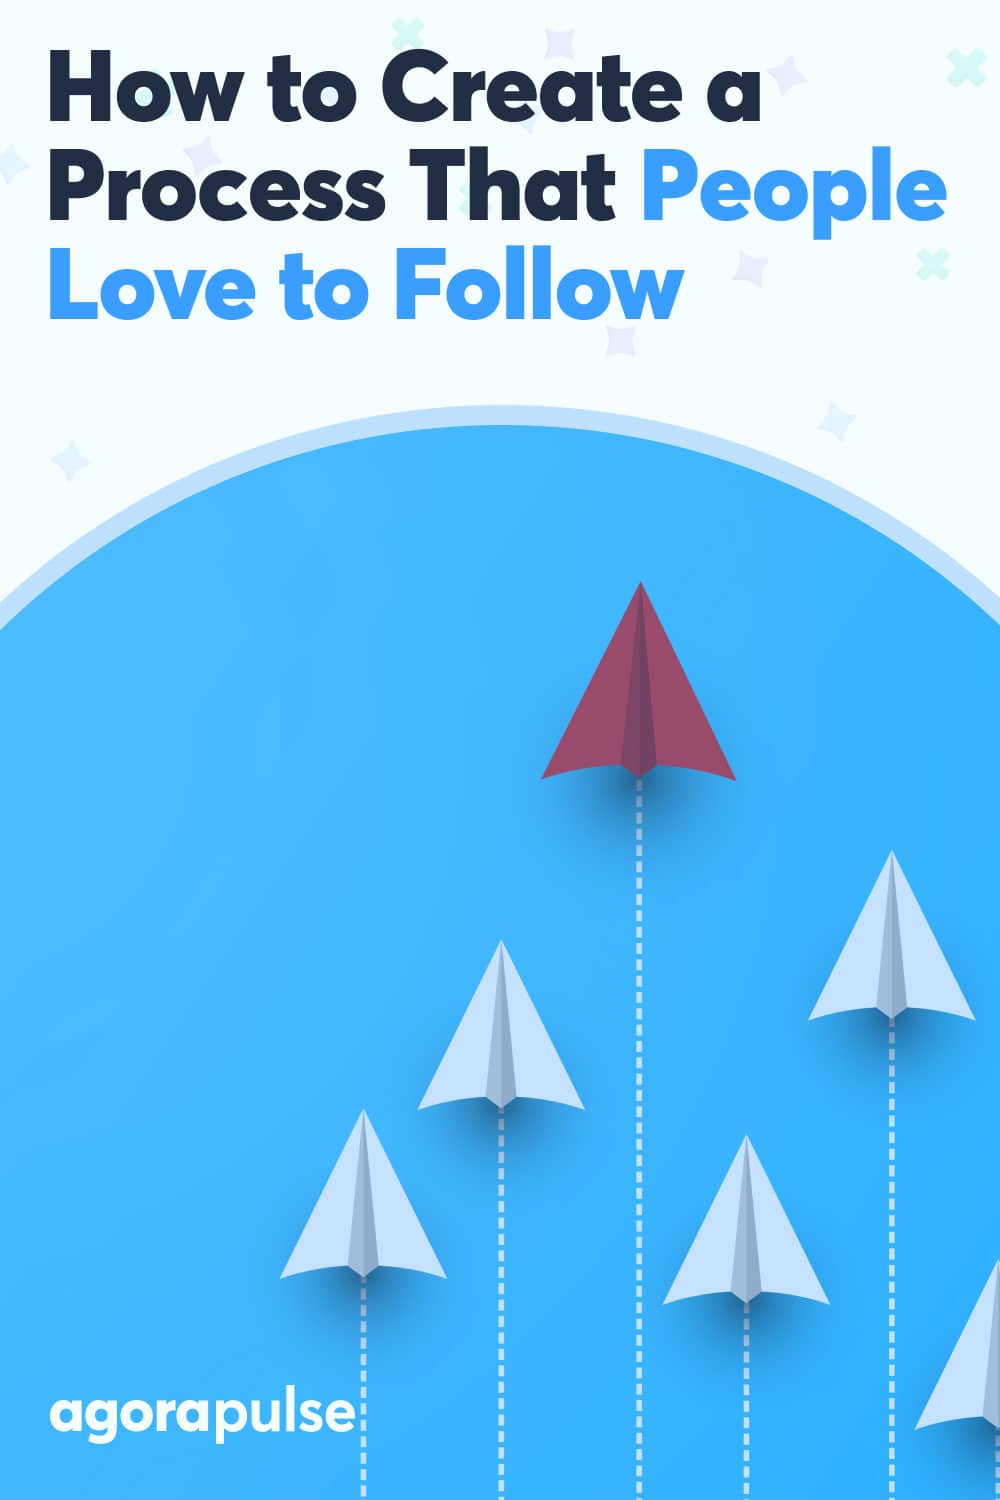 How to Create a Process That People Love to Follow